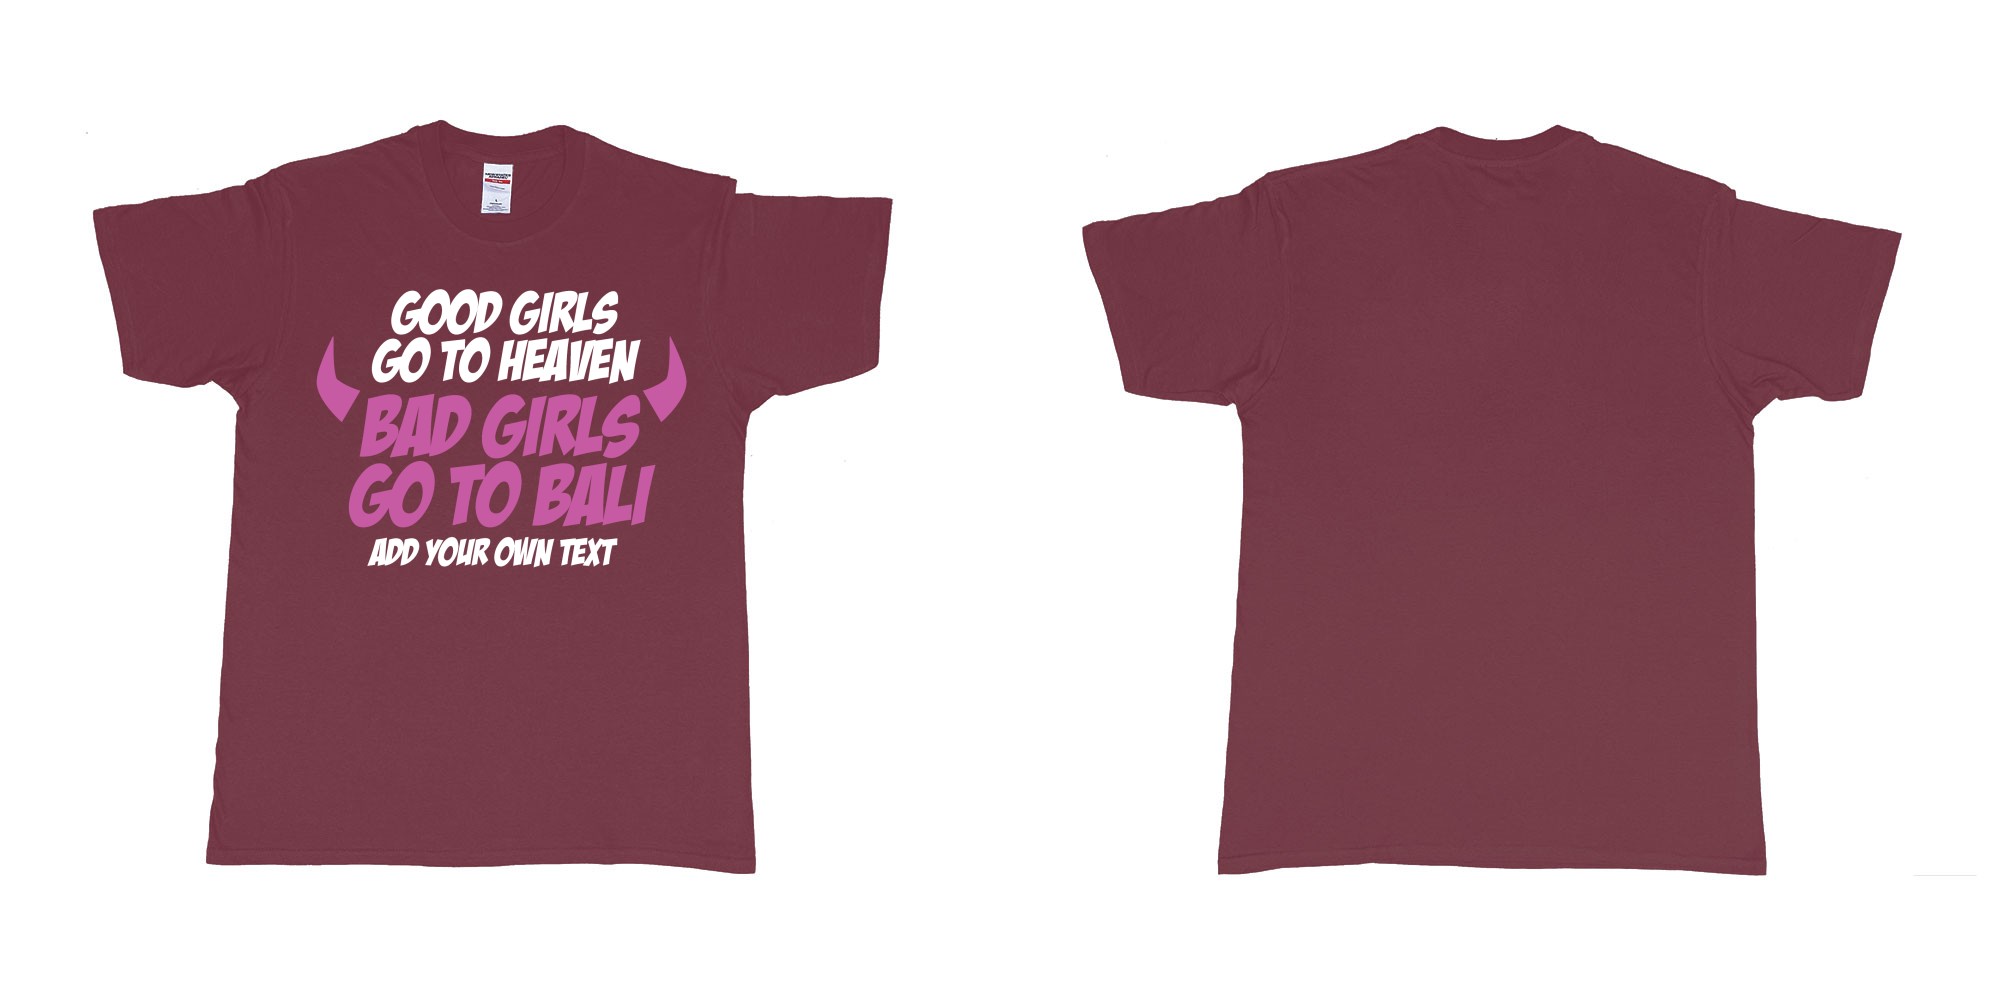 Custom tshirt design good girls go to heaven bad girls go to bali in fabric color marron choice your own text made in Bali by The Pirate Way